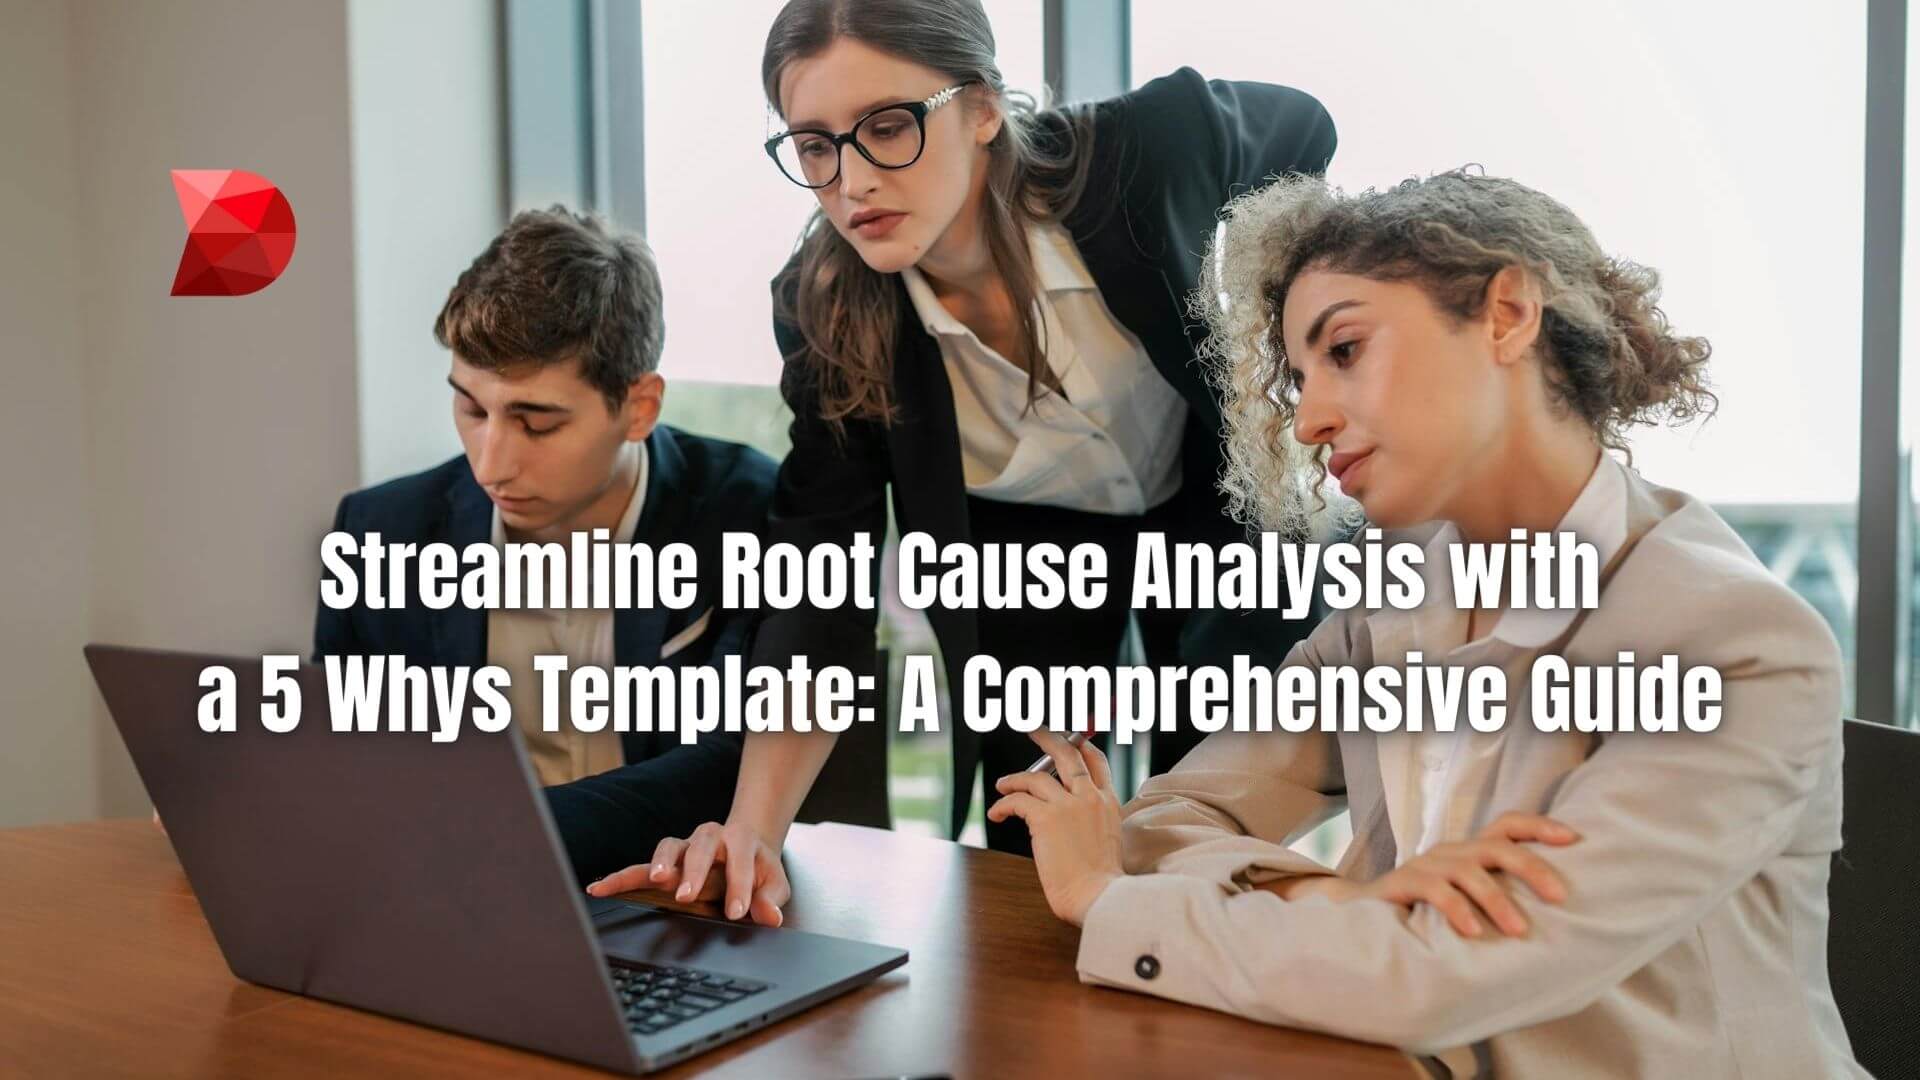 Empower your problem-solving skills with our guide to root cause analysis. Learn to streamline your approach using our 5 Whys Template.